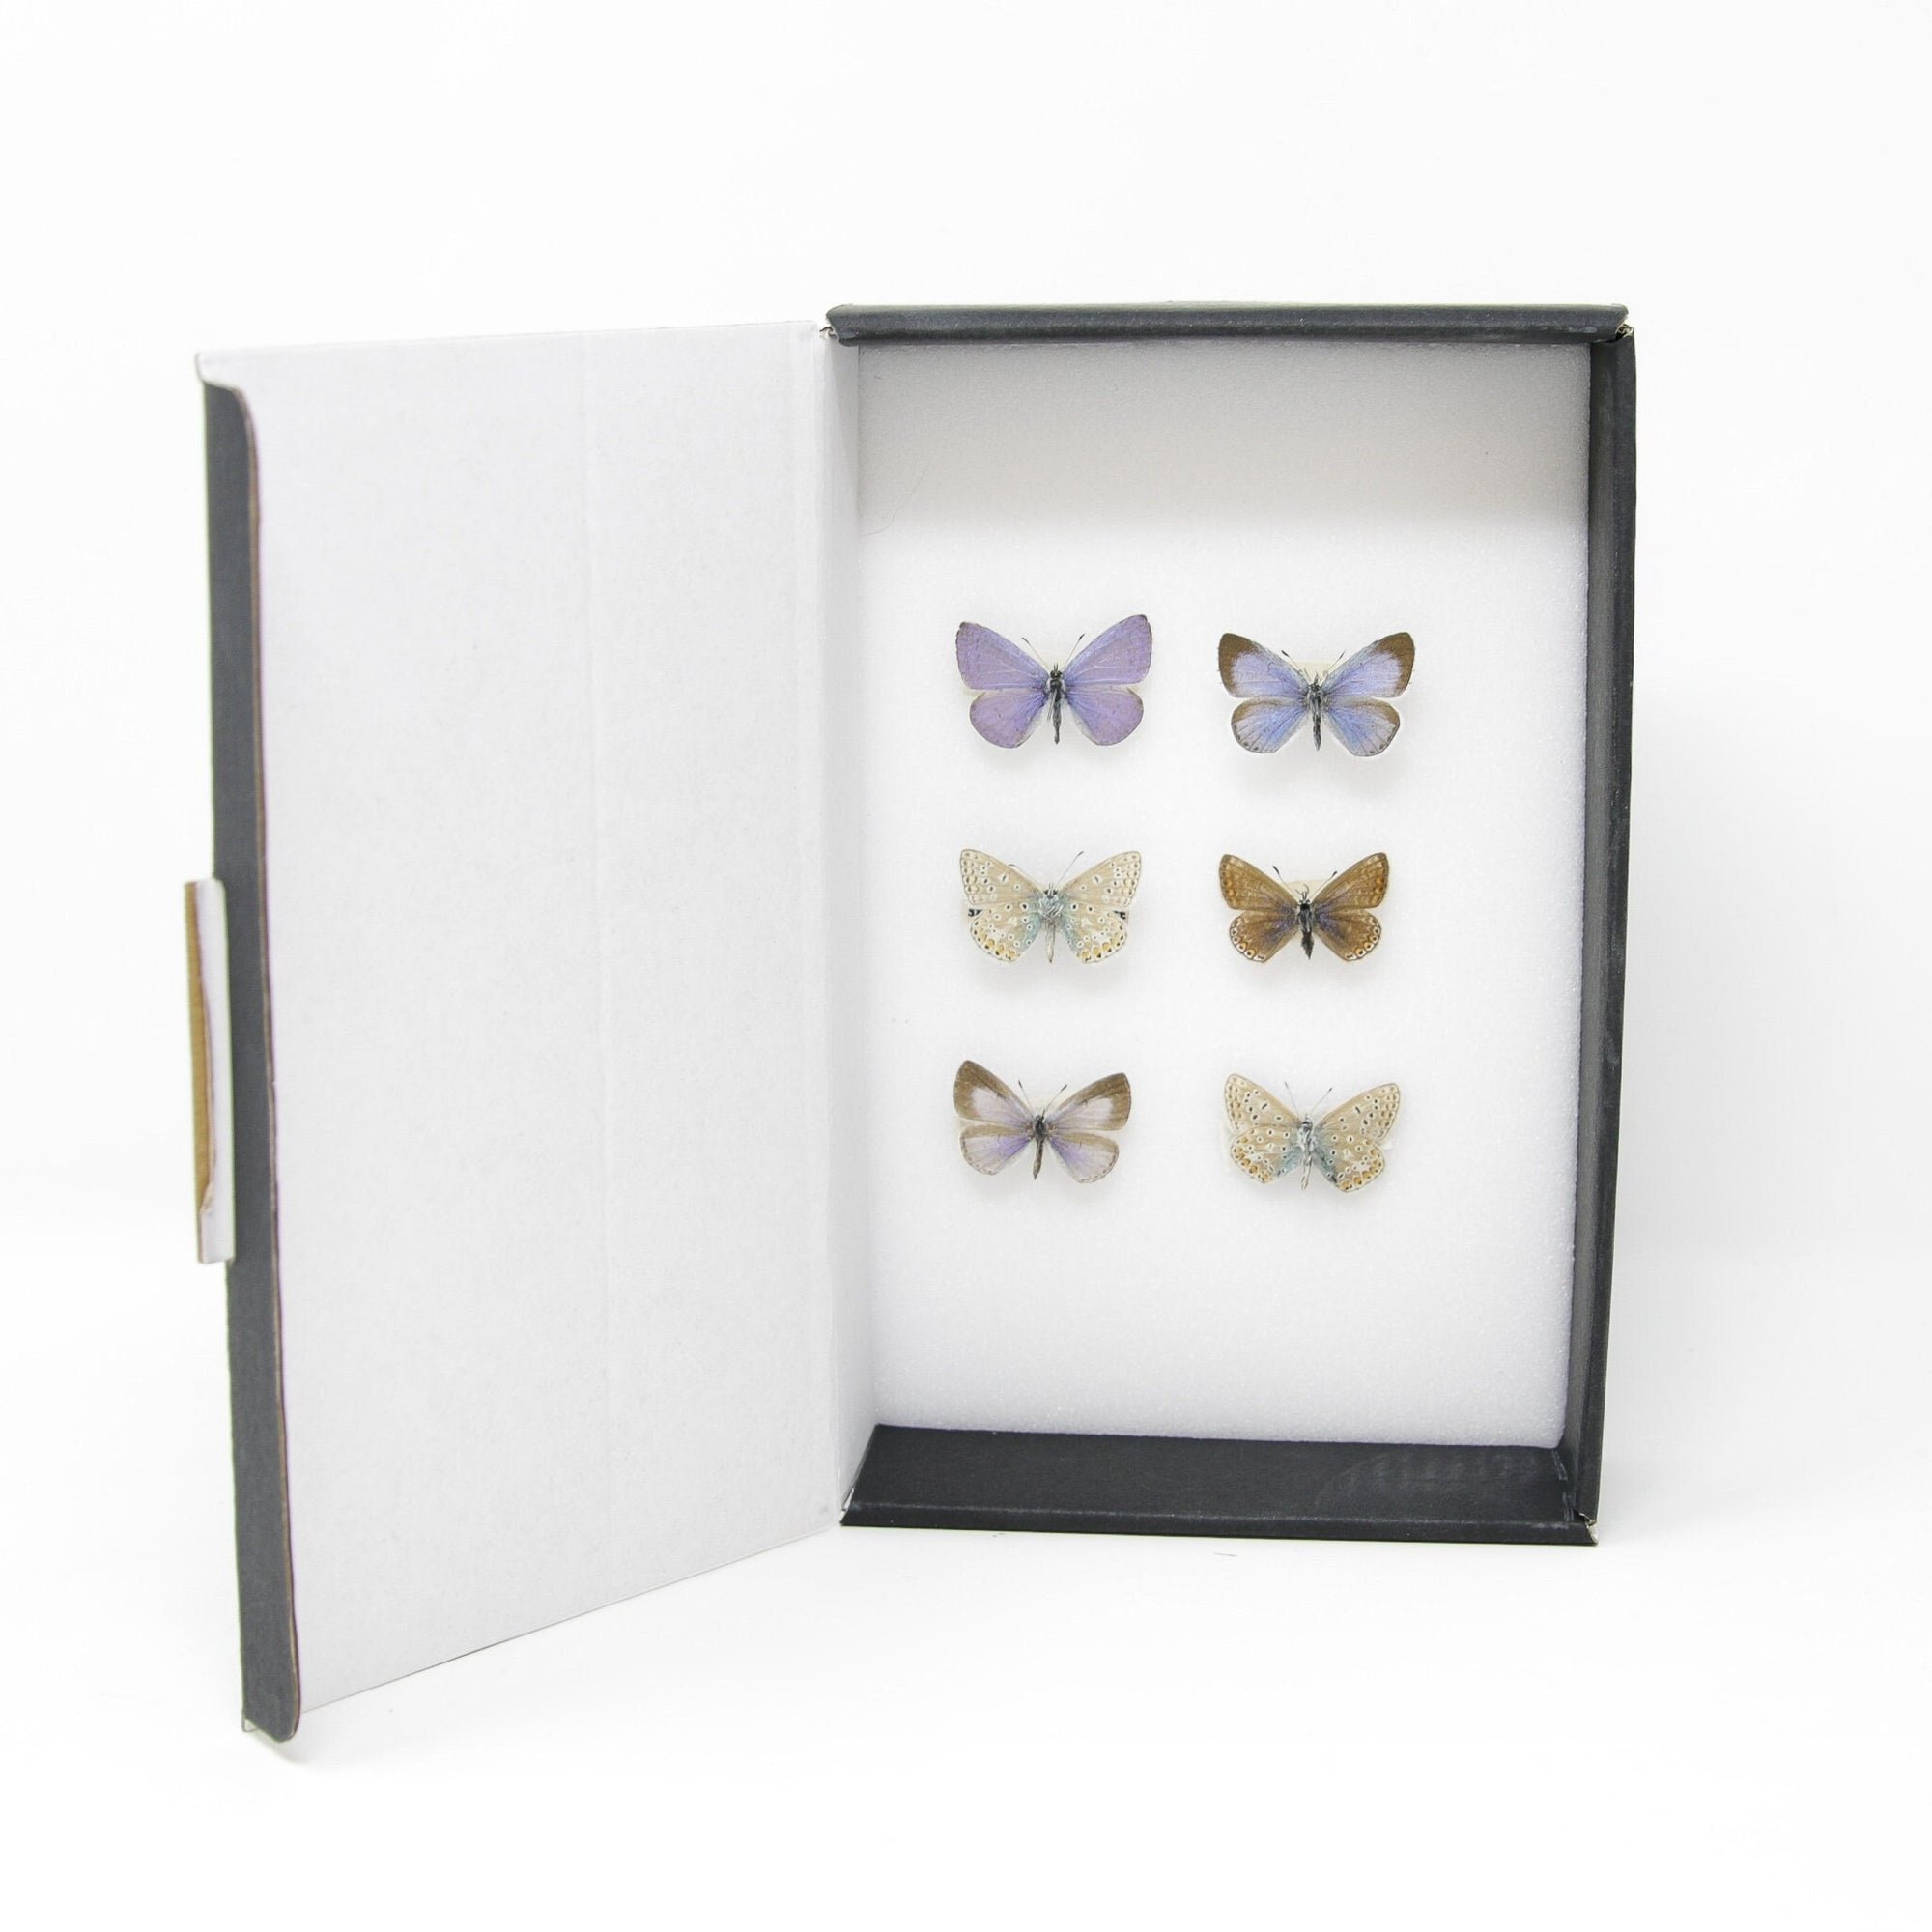 A Collection of Palearctic Blue Butterflies with Scientific Collection Data, A1 Quality, Entomology, Real Lepidoptera Specimens #SE08